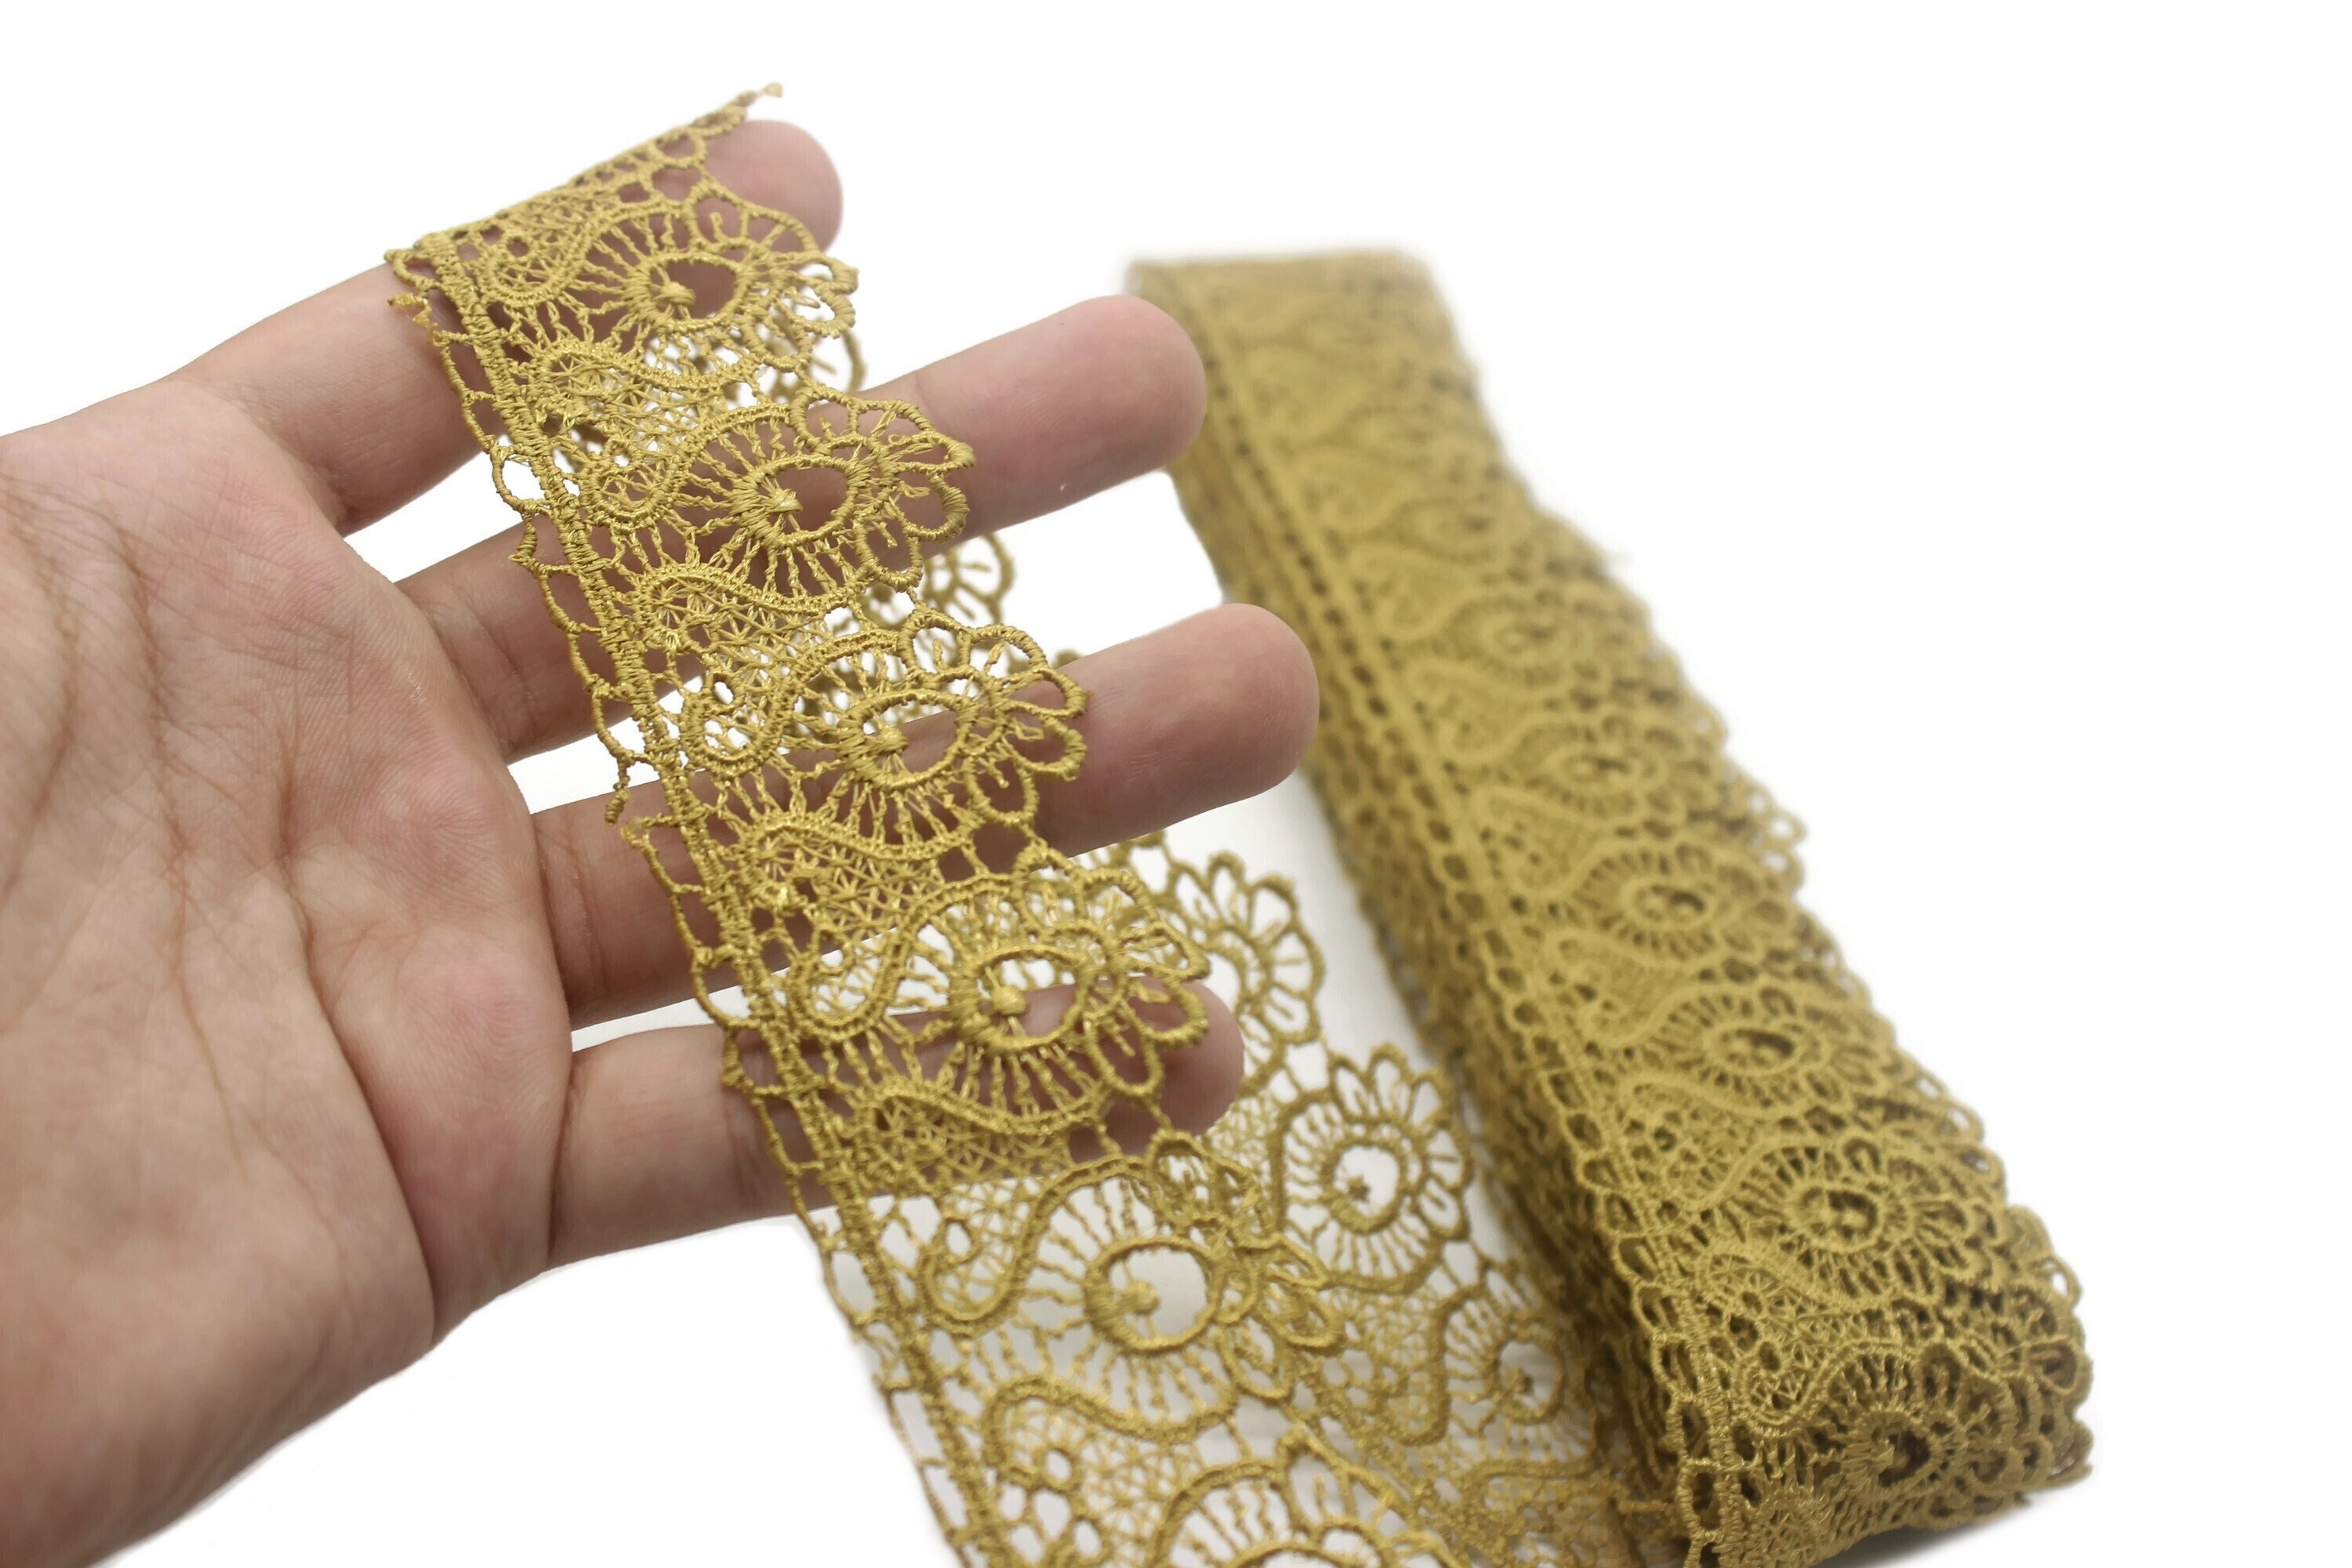 Gold Lace Ribbon Trim, Gold Embroidery Lace Trim for Sewing, Heart Metallic Crafts Decor Trim Fabric (Gold, 0.5 IN5 Yards)